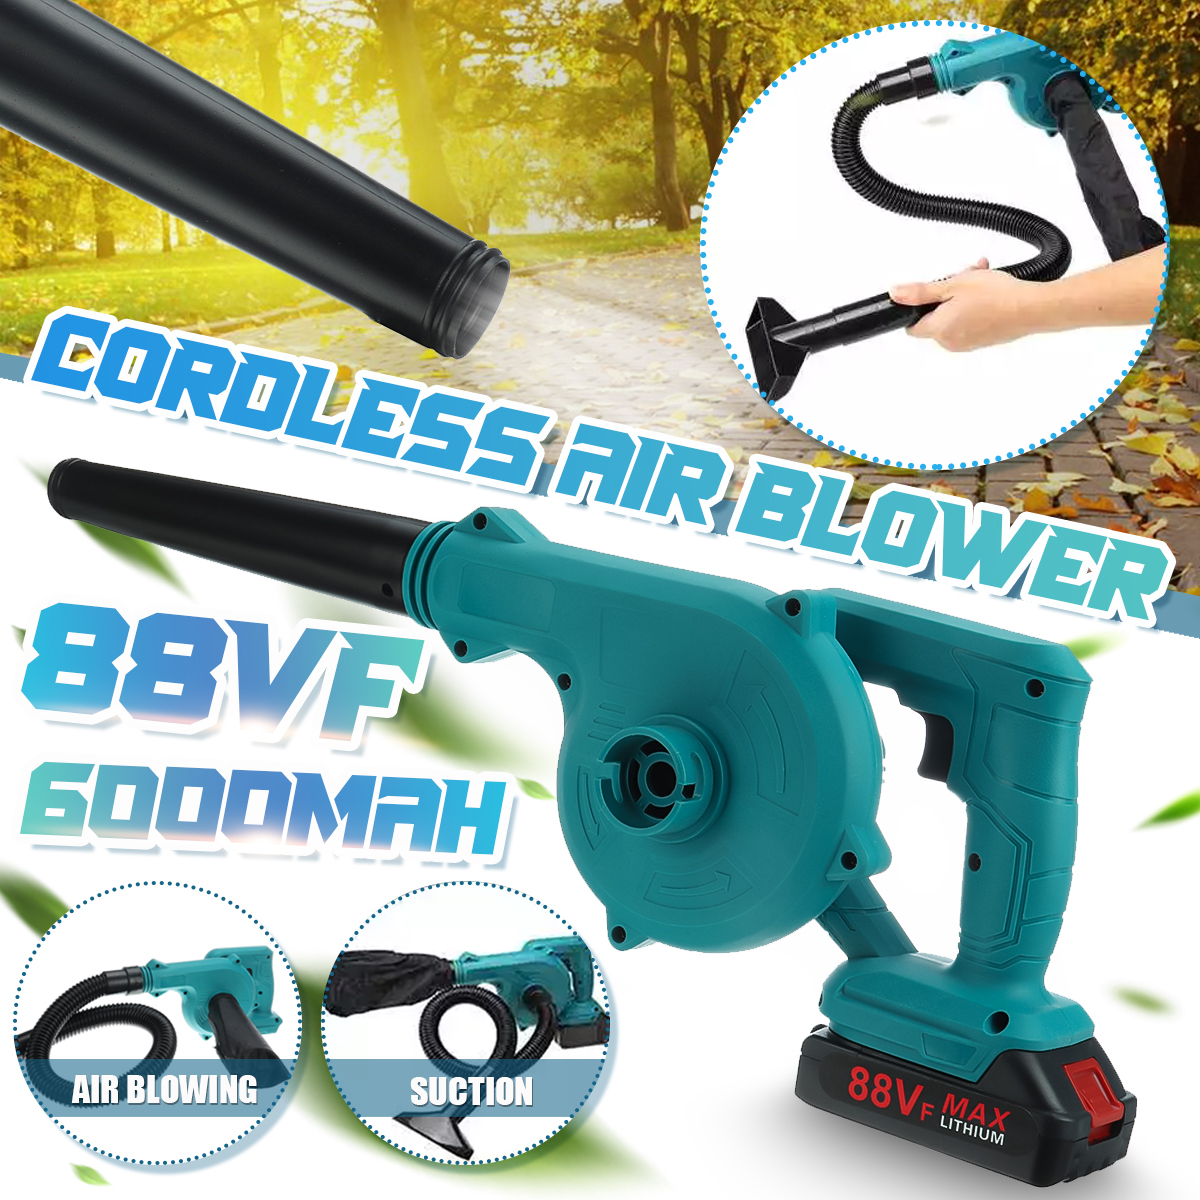 2-IN-1-Cordless-Electric-Air-Blower--Suction-Handheld-Leaf-Computer-Dust-Collector-Cleaner-Power-Too-1851240-1